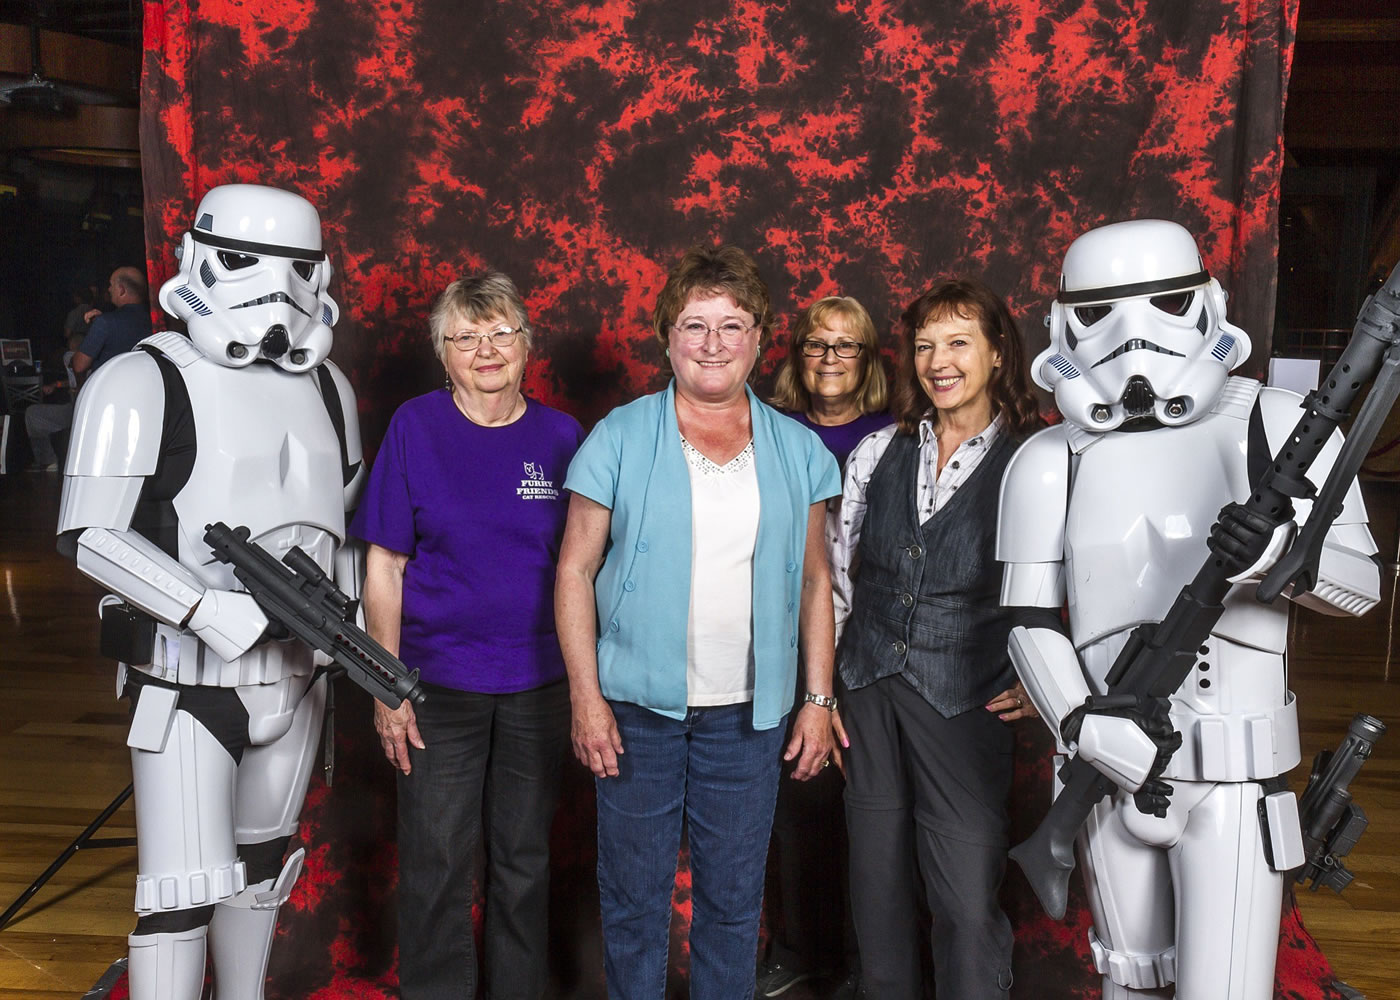 Fisher's Landing East: Ellen Schroder, from left, Jan Berg, Sandi Long, Diane Stevens with Stormtroopers at a fundraiser for Furry Friends on May 16.